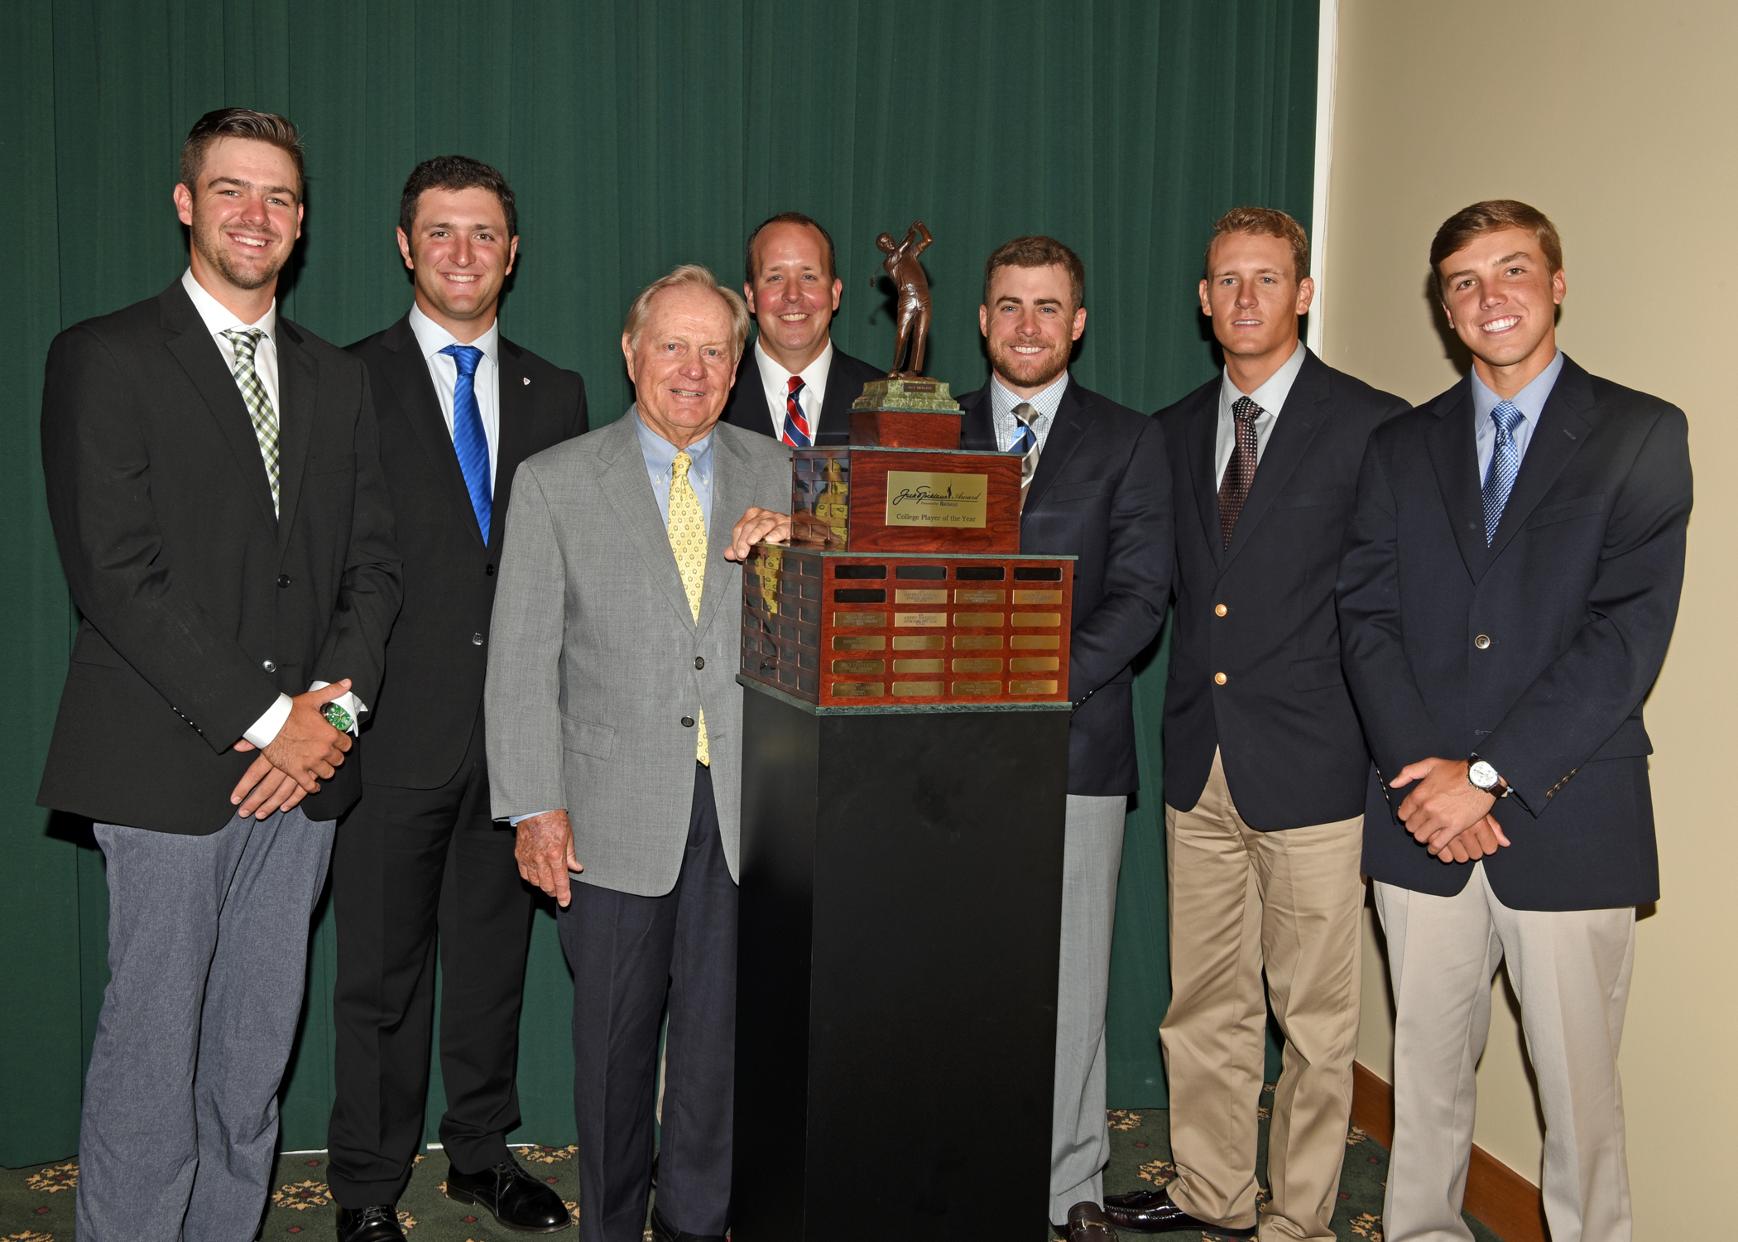 Huntingdon's Addison Lambeth (third from right) was presented the Division III Jack Nicklaus National Player of the Year Award on Sunday. (From L-R) NAIA winner Peter French (Johnson and Wales), Division I winner Jon Rahm (Arizona State), Jack Nicklaus, John Price, Addison Lambeth, NJCAA winner Kerry Sweeney (Eastern Florida State) and Division II winner John Coutlas (Florida Southern).